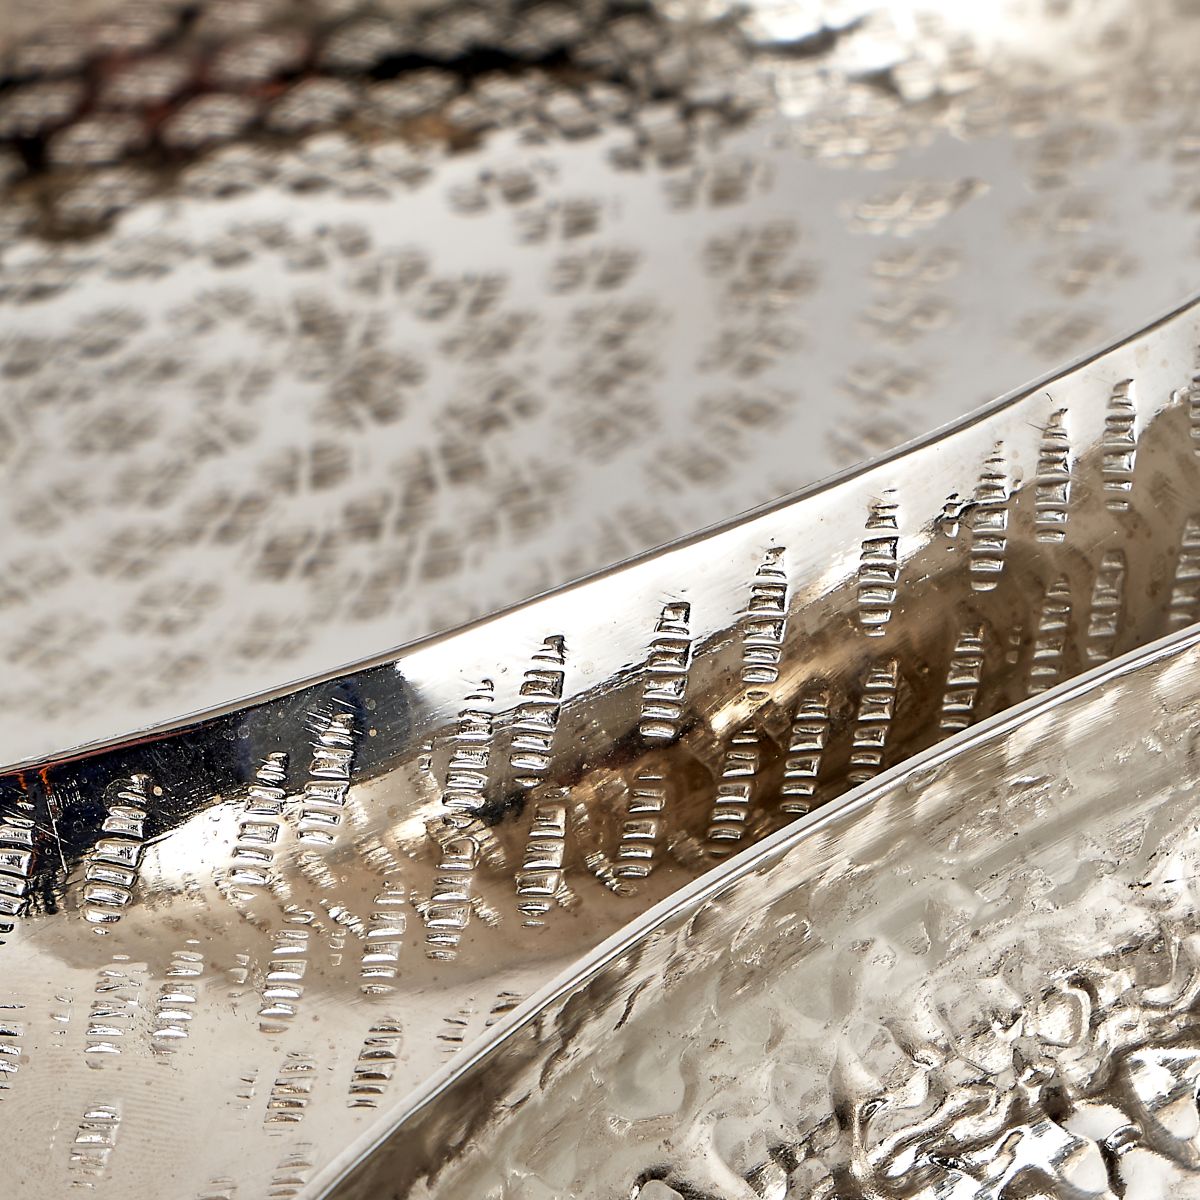 S/2 Silver Hammered Metal Bowls